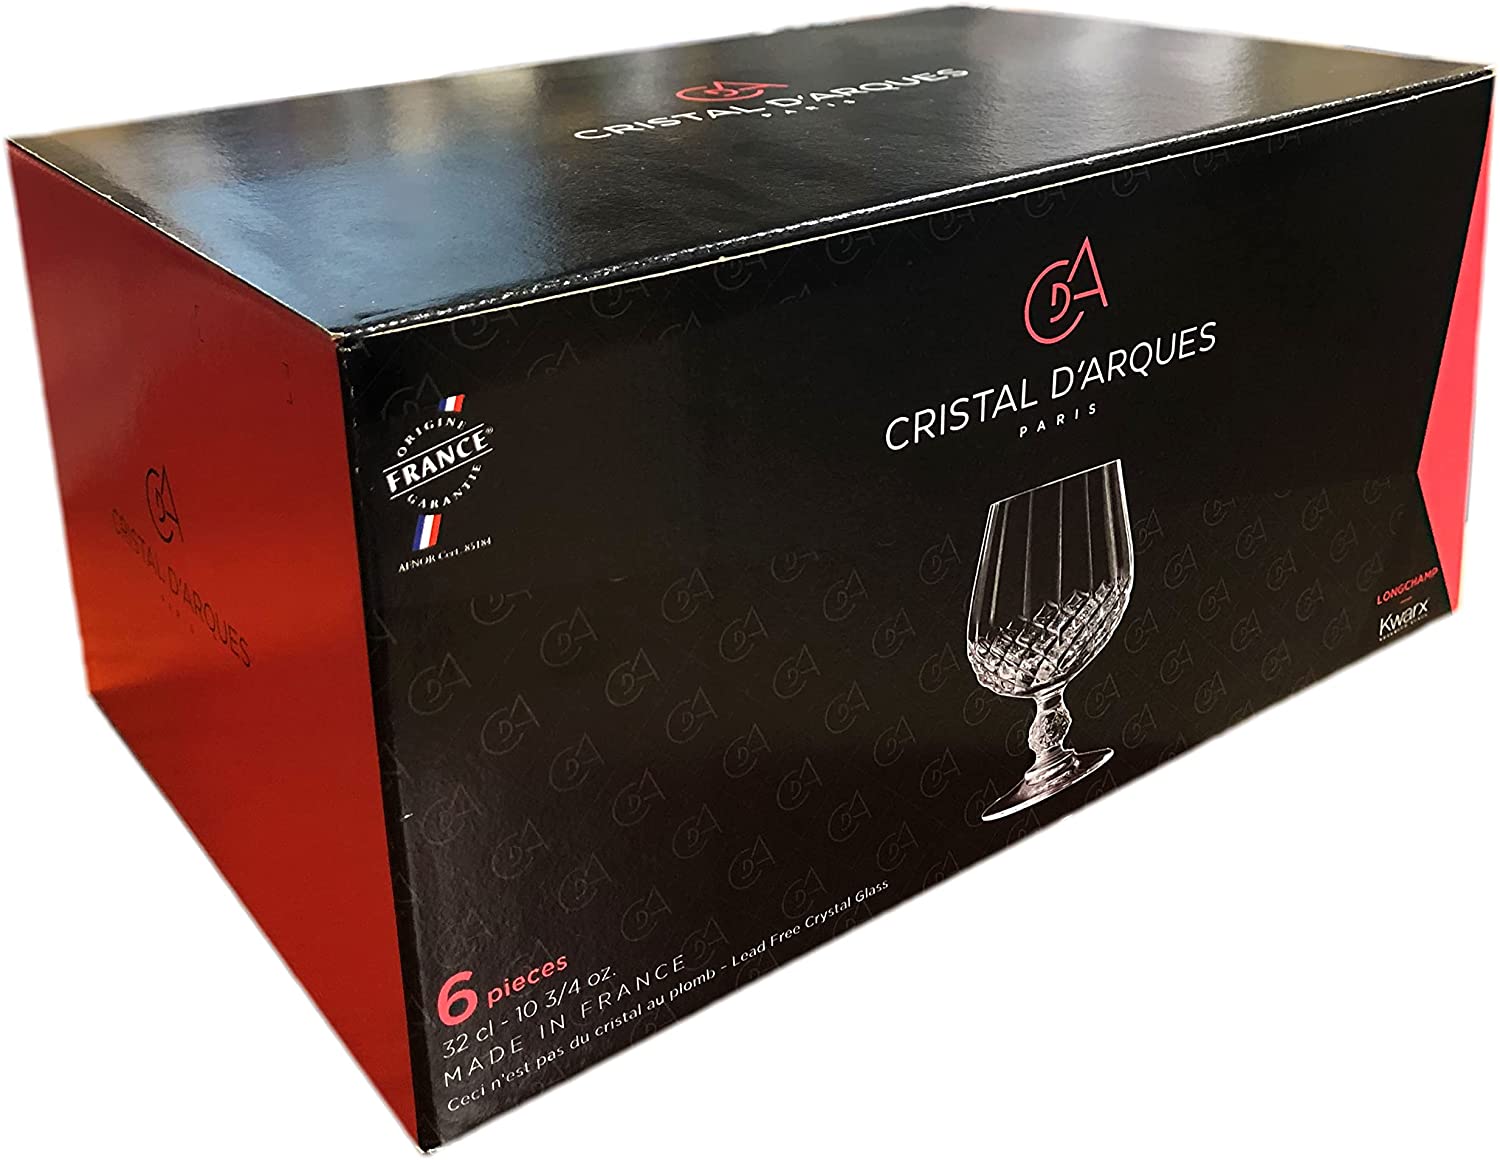 Brandy, 32CL, Set of 6 from Longchamp Cristal D'Arques collection 10.8-oz